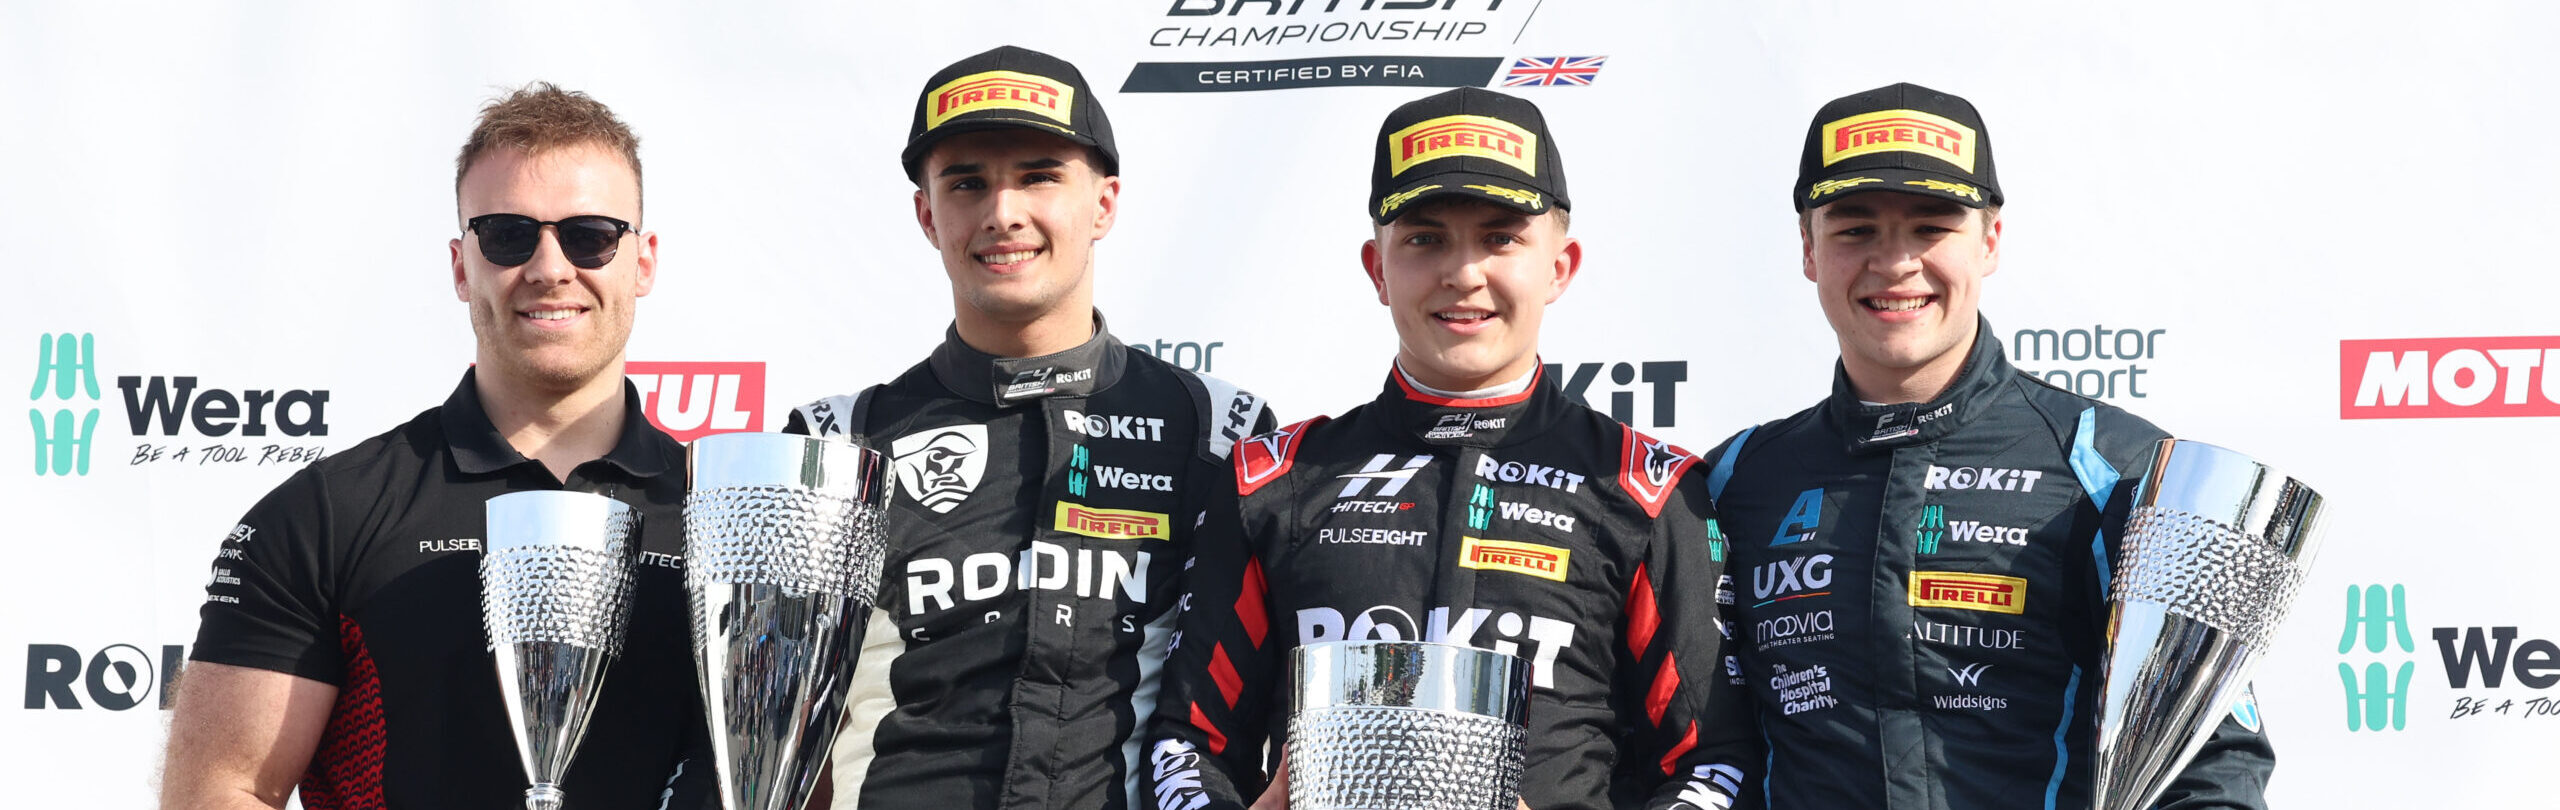 POLE AND RACE WIN FOR FAIRCLOUGH AT BRANDS HATCH